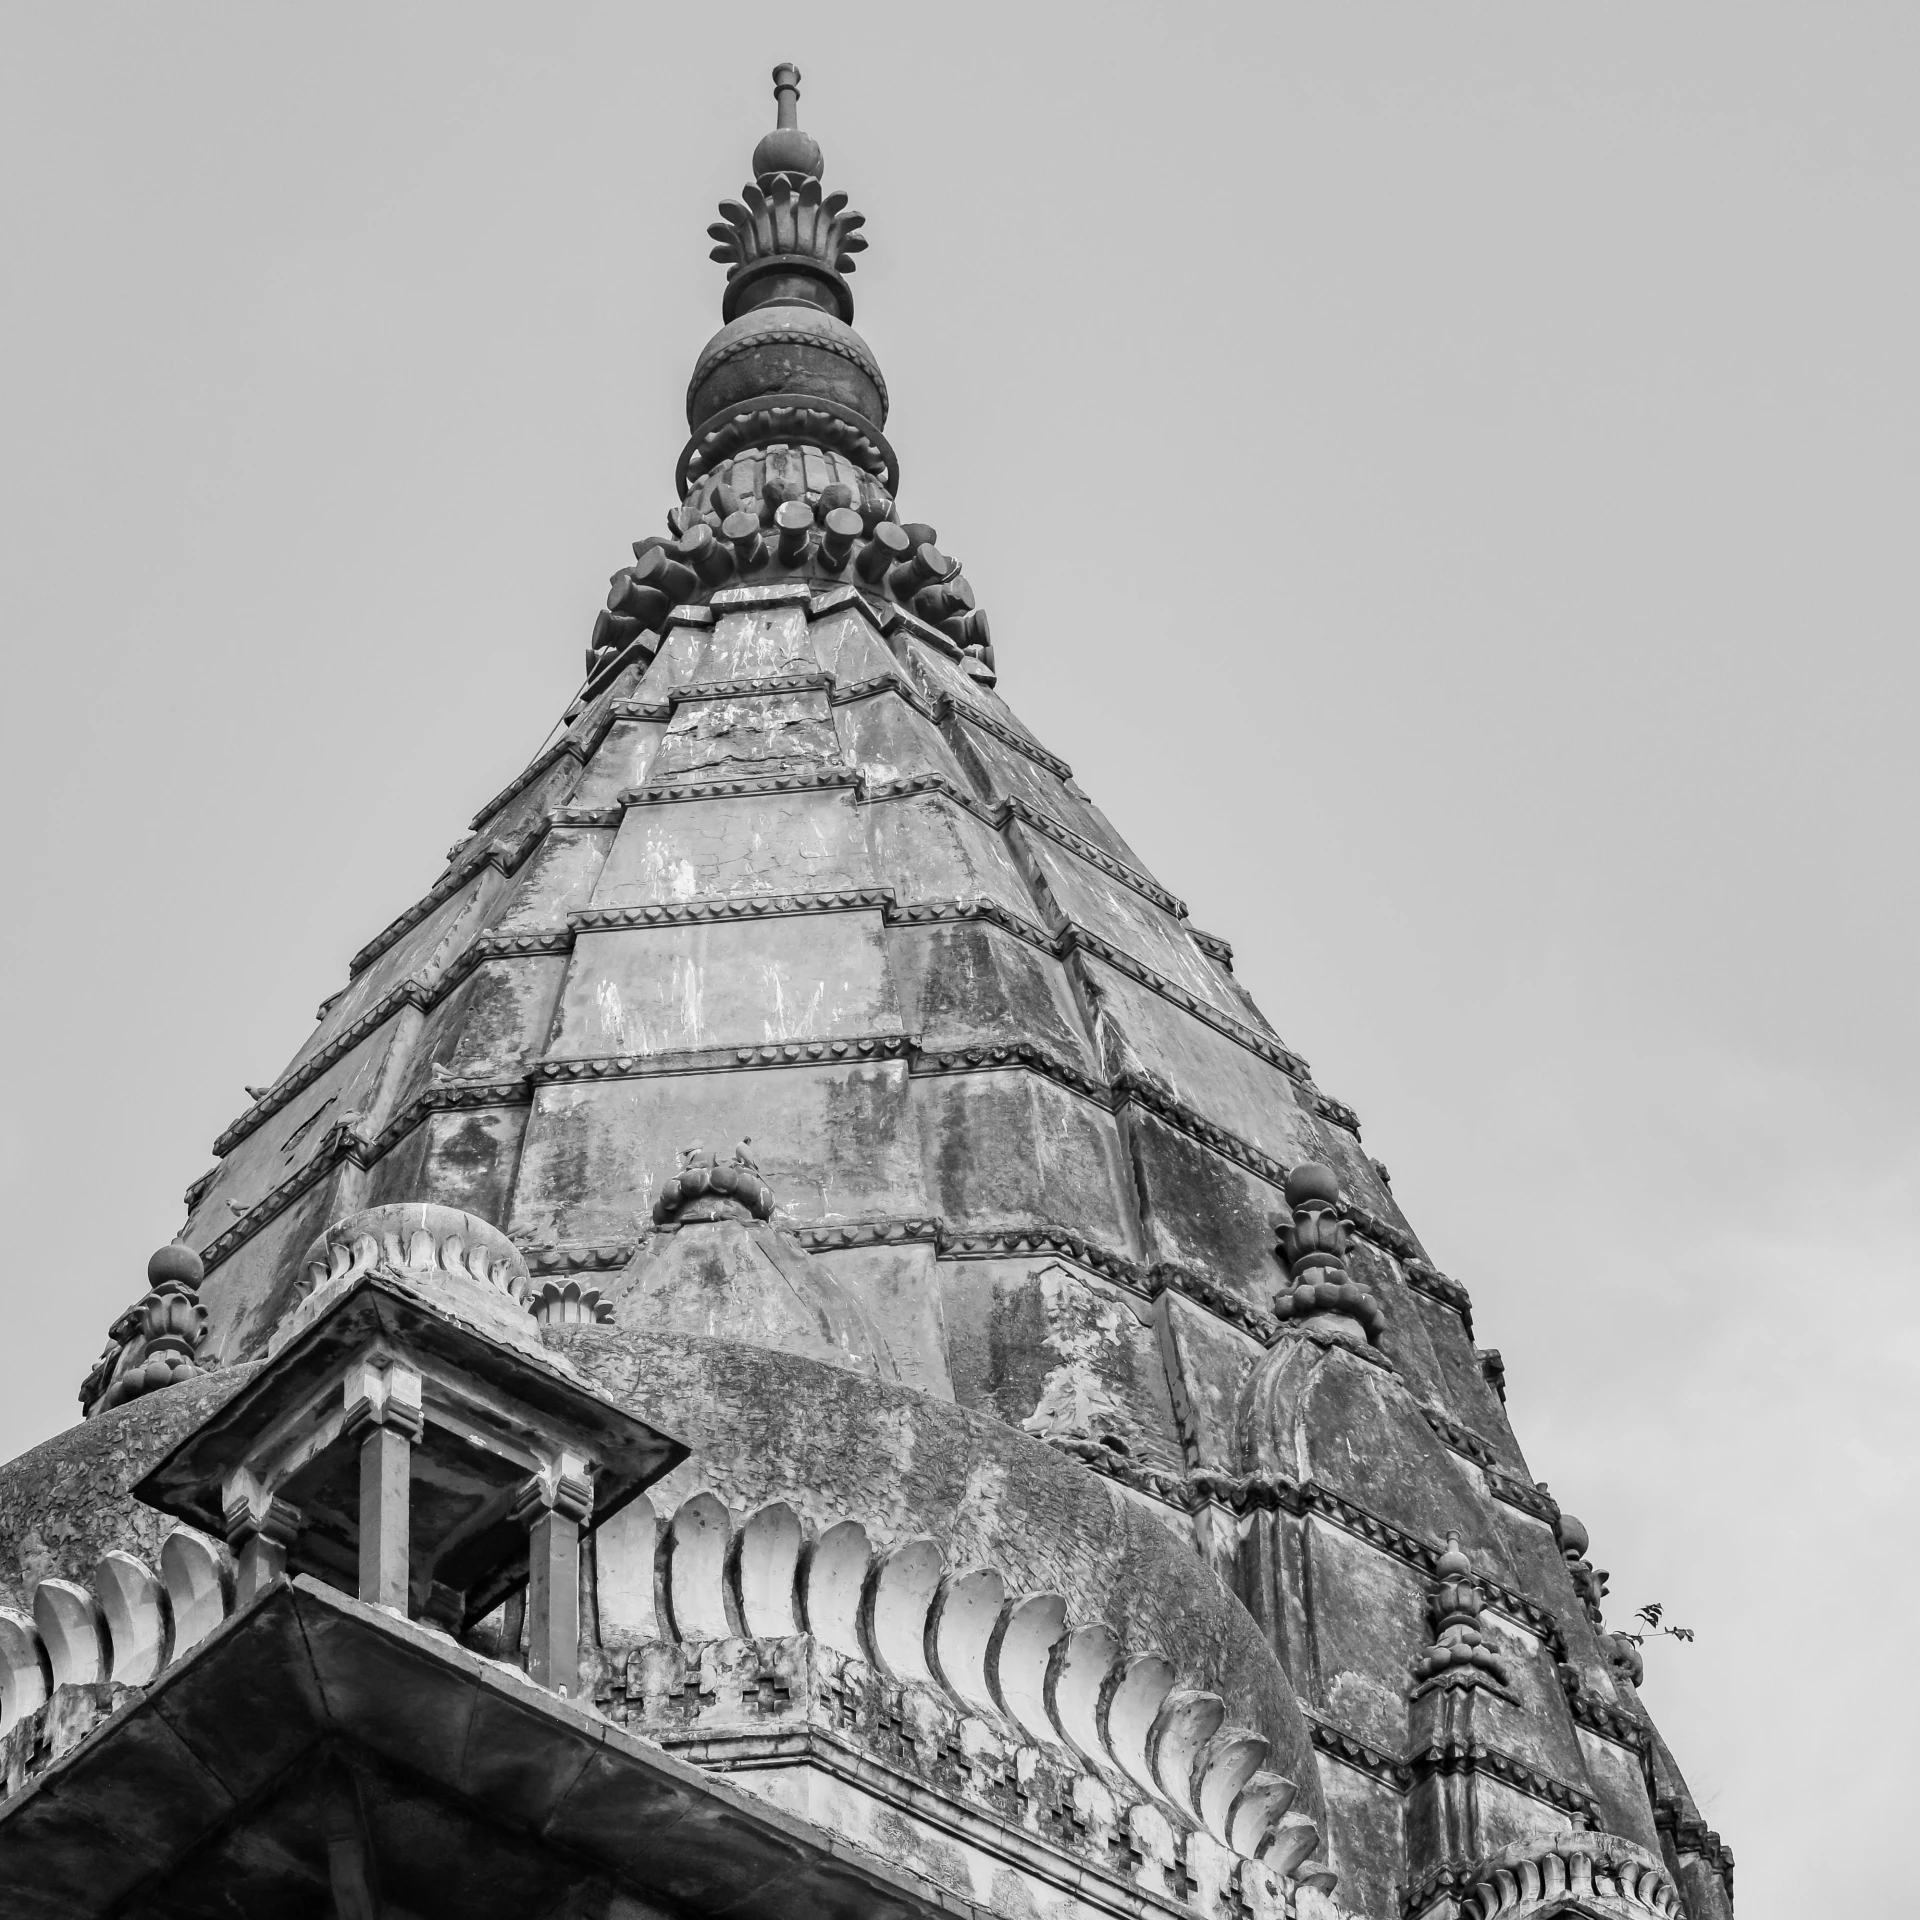 black and white pograph of a large dome on a building